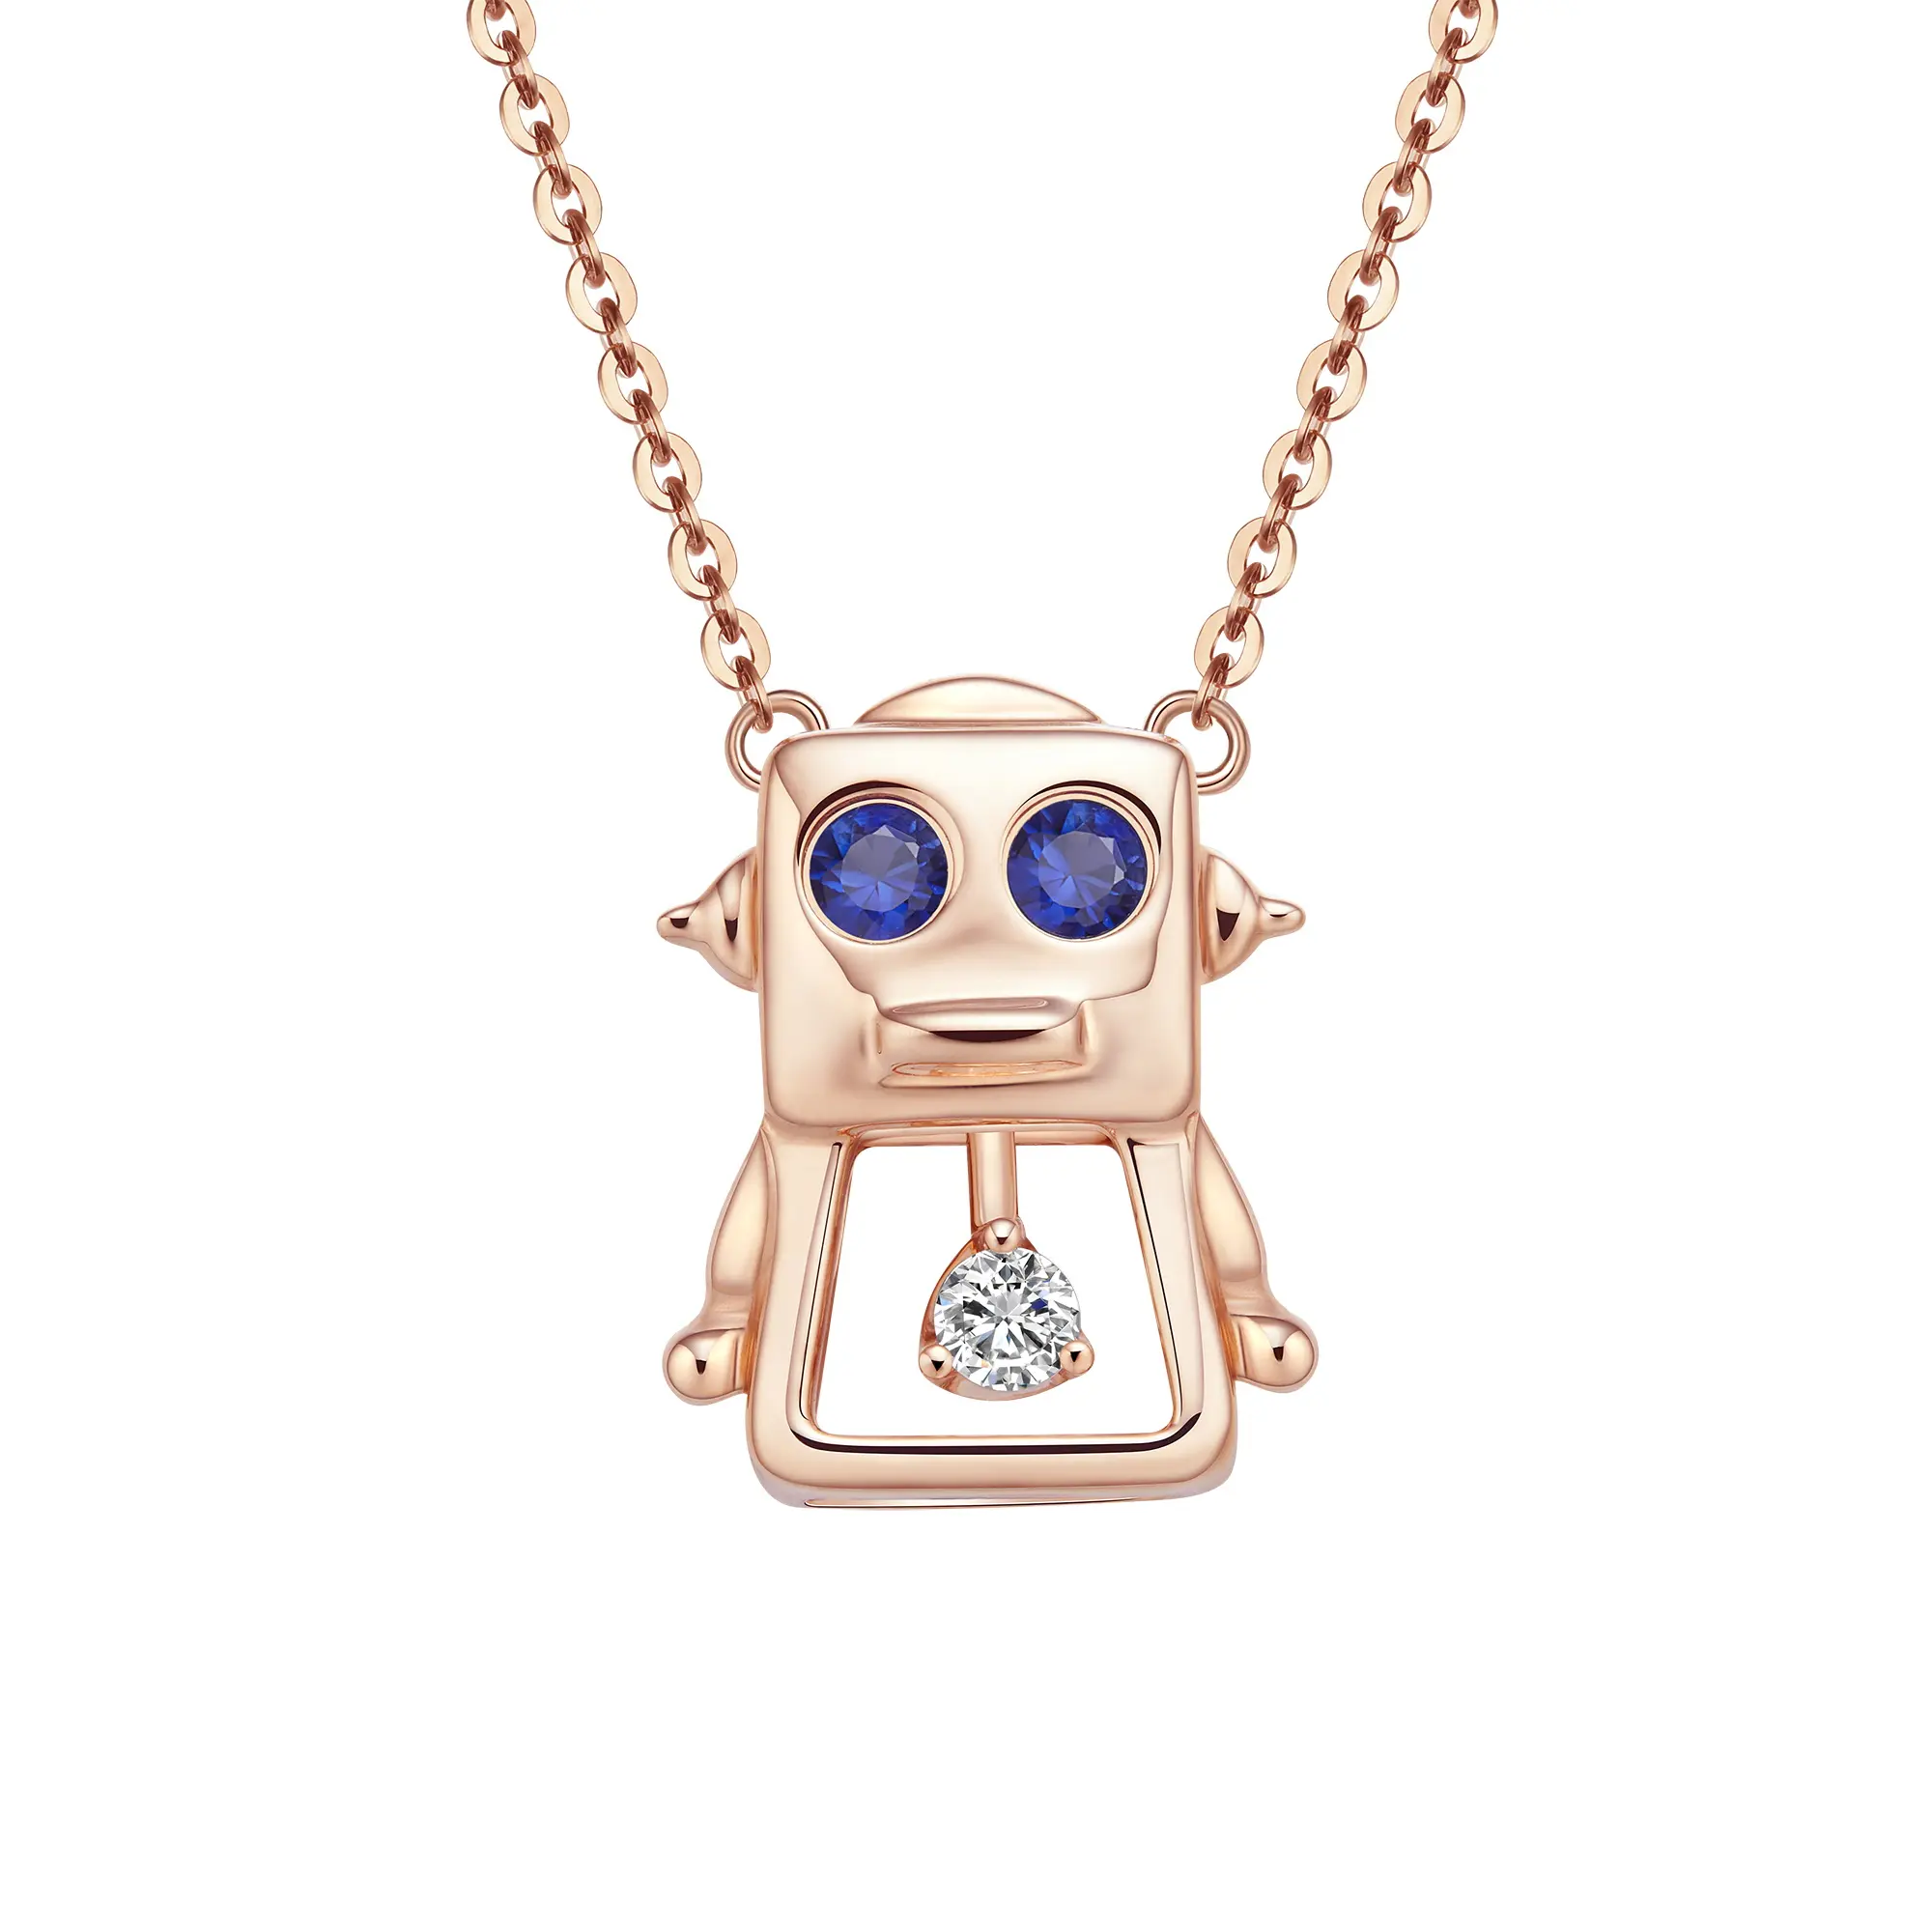 Jingzhanyi Jewelry Factory 2022 new custom beautiful necklace 18K solid rose gold robot diamond pendant necklace for girls